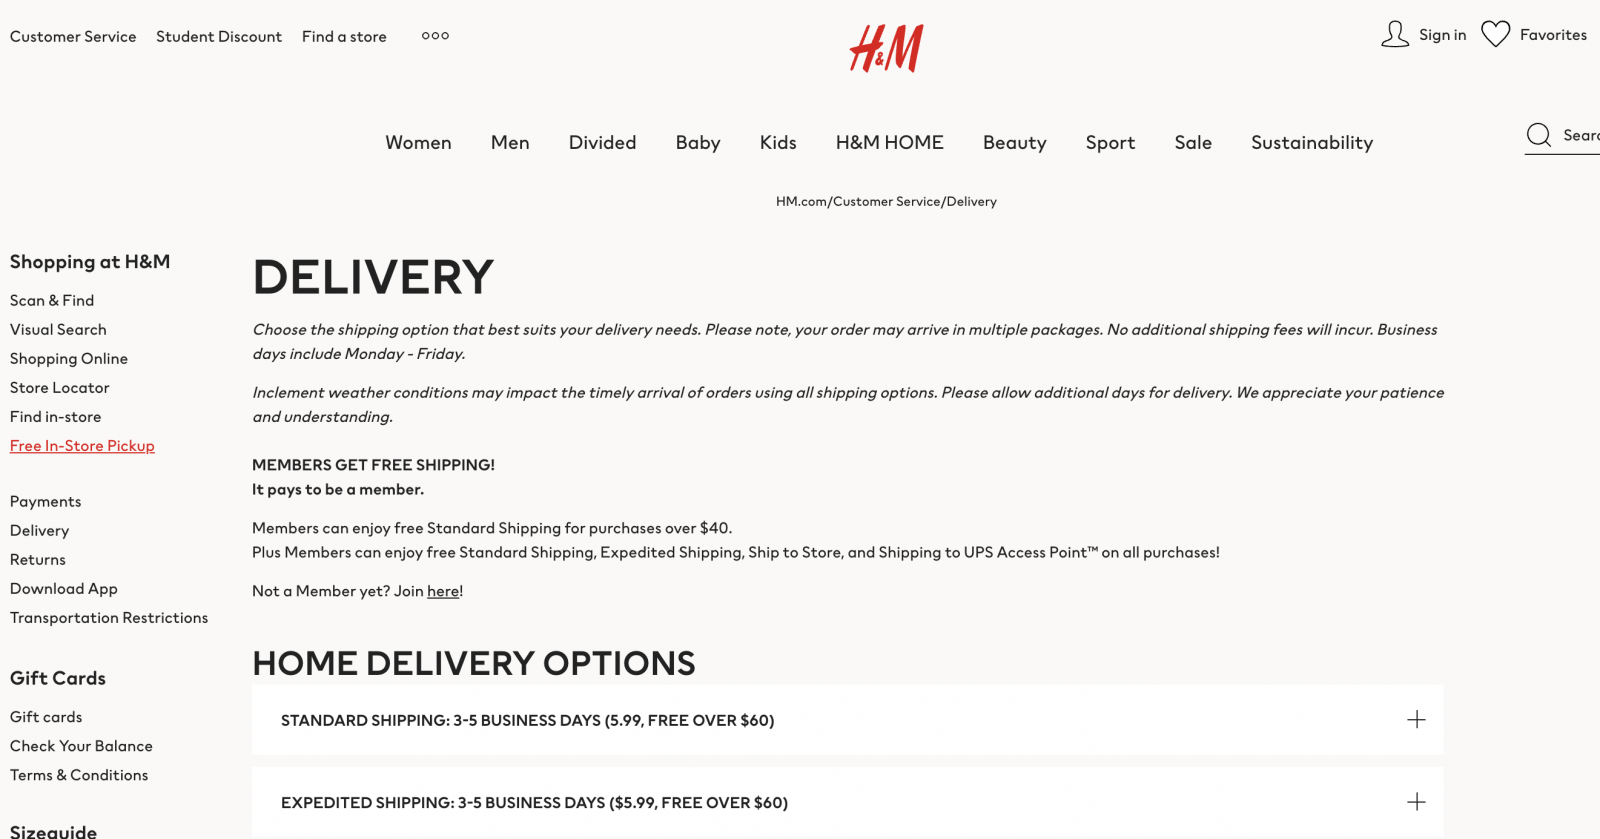 How to save on shipping at h&m